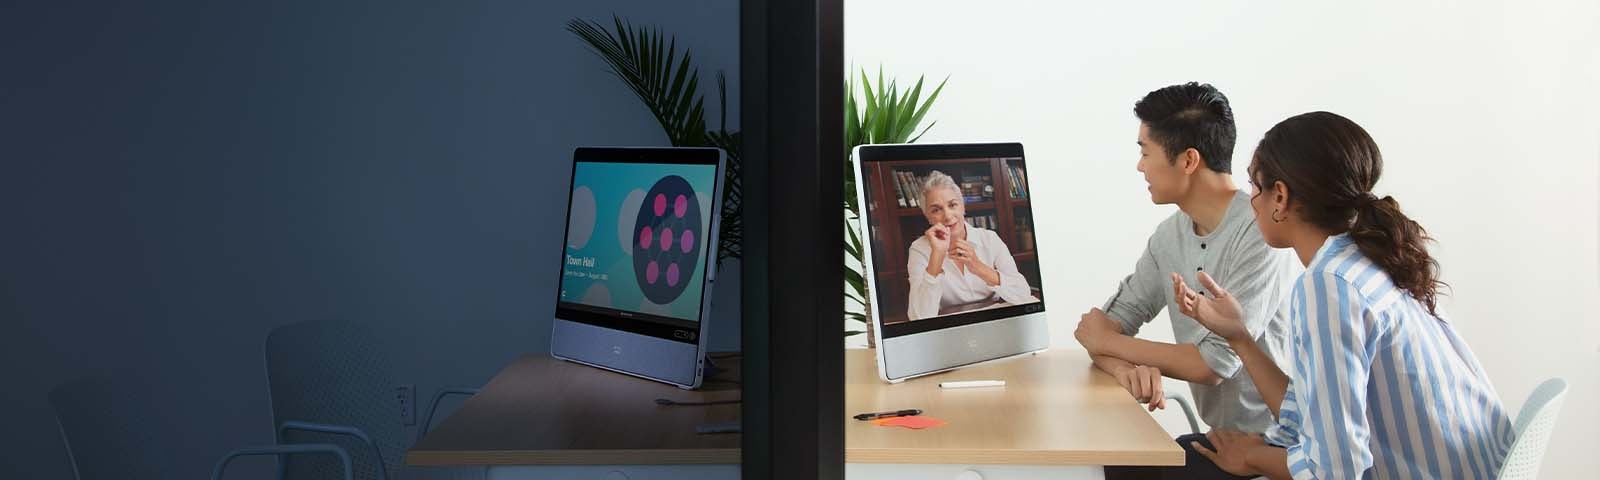 Video conferencing monitor for the desk